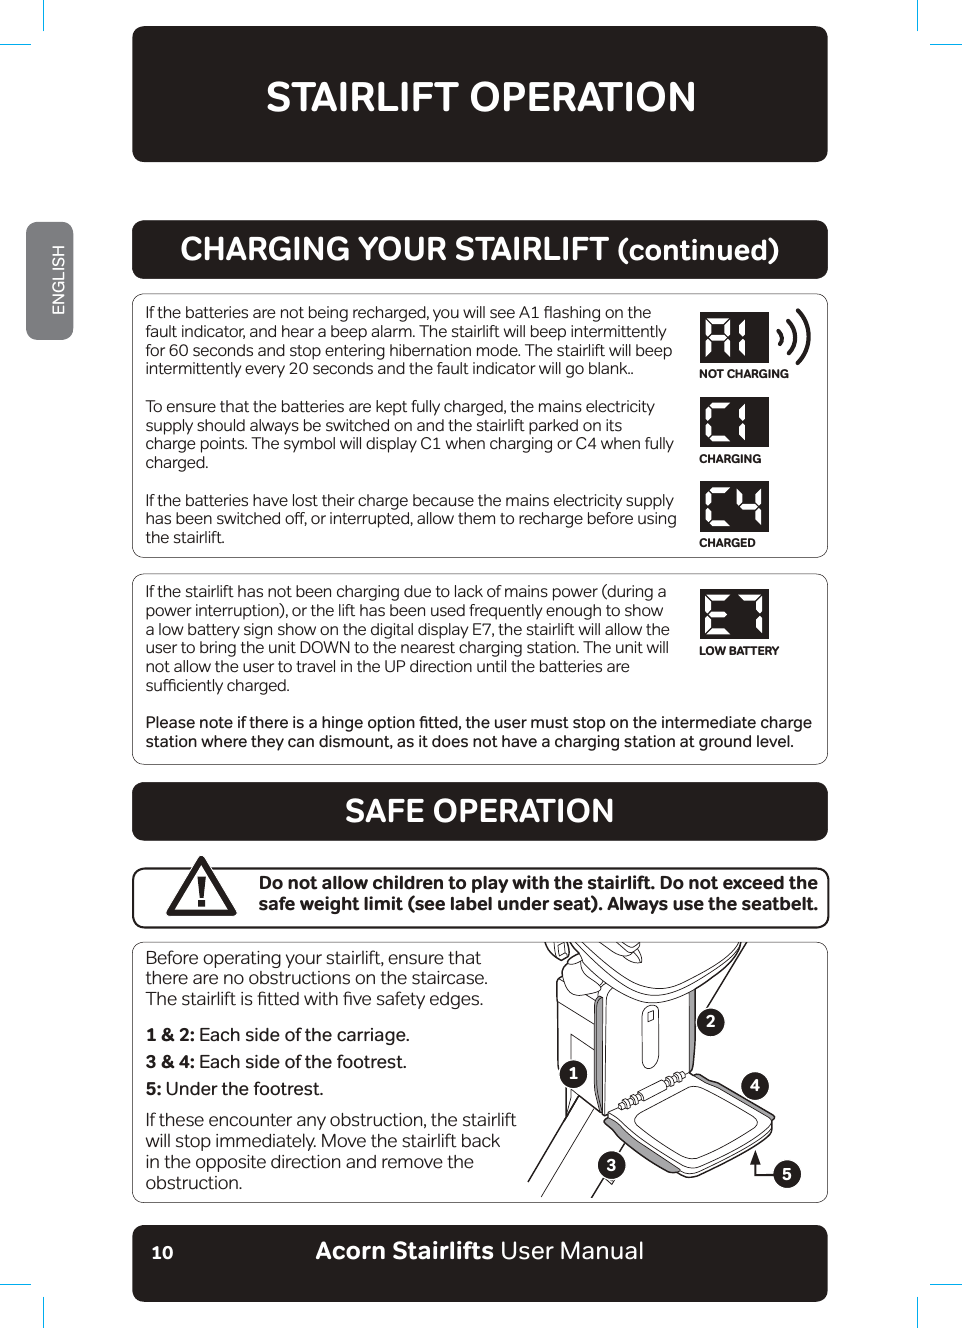 Acorn Stairlifts User ManualENGLISH10If the stairlift has not been charging due to lack of mains power (during a power interruption), or the lift has been used frequently enough to show a low battery sign show on the digital display E7, the stairlift will allow the user to bring the unit DOWN to the nearest charging station. The unit will not allow the user to travel in the UP direction until the batteries are VXƹFLHQWO\FKDUJHG3OHDVHQRWHLIWKHUHLVDKLQJHRSWLRQƶWWHGWKHXVHUPXVWVWRSRQWKHLQWHUPHGLDWHFKDUJHstation where they can dismount, as it does not have a charging station at ground level. STAIRLIFT OPERATION,IWKHEDWWHULHVDUHQRWEHLQJUHFKDUJHG\RXZLOOVHH$ƸDVKLQJRQWKHfault indicator, and hear a beep alarm. The stairlift will beep intermittently for 60 seconds and stop entering hibernation mode. The stairlift will beep intermittently every 20 seconds and the fault indicator will go blank.. To ensure that the batteries are kept fully charged, the mains electricity supply should always be switched on and the stairlift parked on its charge points. The symbol will display C1 when charging or C4 when fully charged.If the batteries have lost their charge because the mains electricity supply KDVEHHQVZLWFKHGRƶRULQWHUUXSWHGDOORZWKHPWRUHFKDUJHEHIRUHXVLQJthe stairlift. CHARGING YOUR STAIRLIFT (continued)SAFE OPERATIONBefore operating your stairlift, ensure that there are no obstructions on the staircase. 7KHVWDLUOLIWLVƷWWHGZLWKƷYHVDIHW\HGJHV1 &amp; 2: Each side of the carriage.3 &amp; 4: Each side of the footrest.5: Under the footrest.If these encounter any obstruction, the stairlift will stop immediately. Move the stairlift back in the opposite direction and remove the obstruction.Do not allow children to play with the stairlift. Do not exceed the safe weight limit (see label under seat). Always use the seatbelt.12345NOT CHARGINGCHARGINGCHARGEDLOW BATTERY